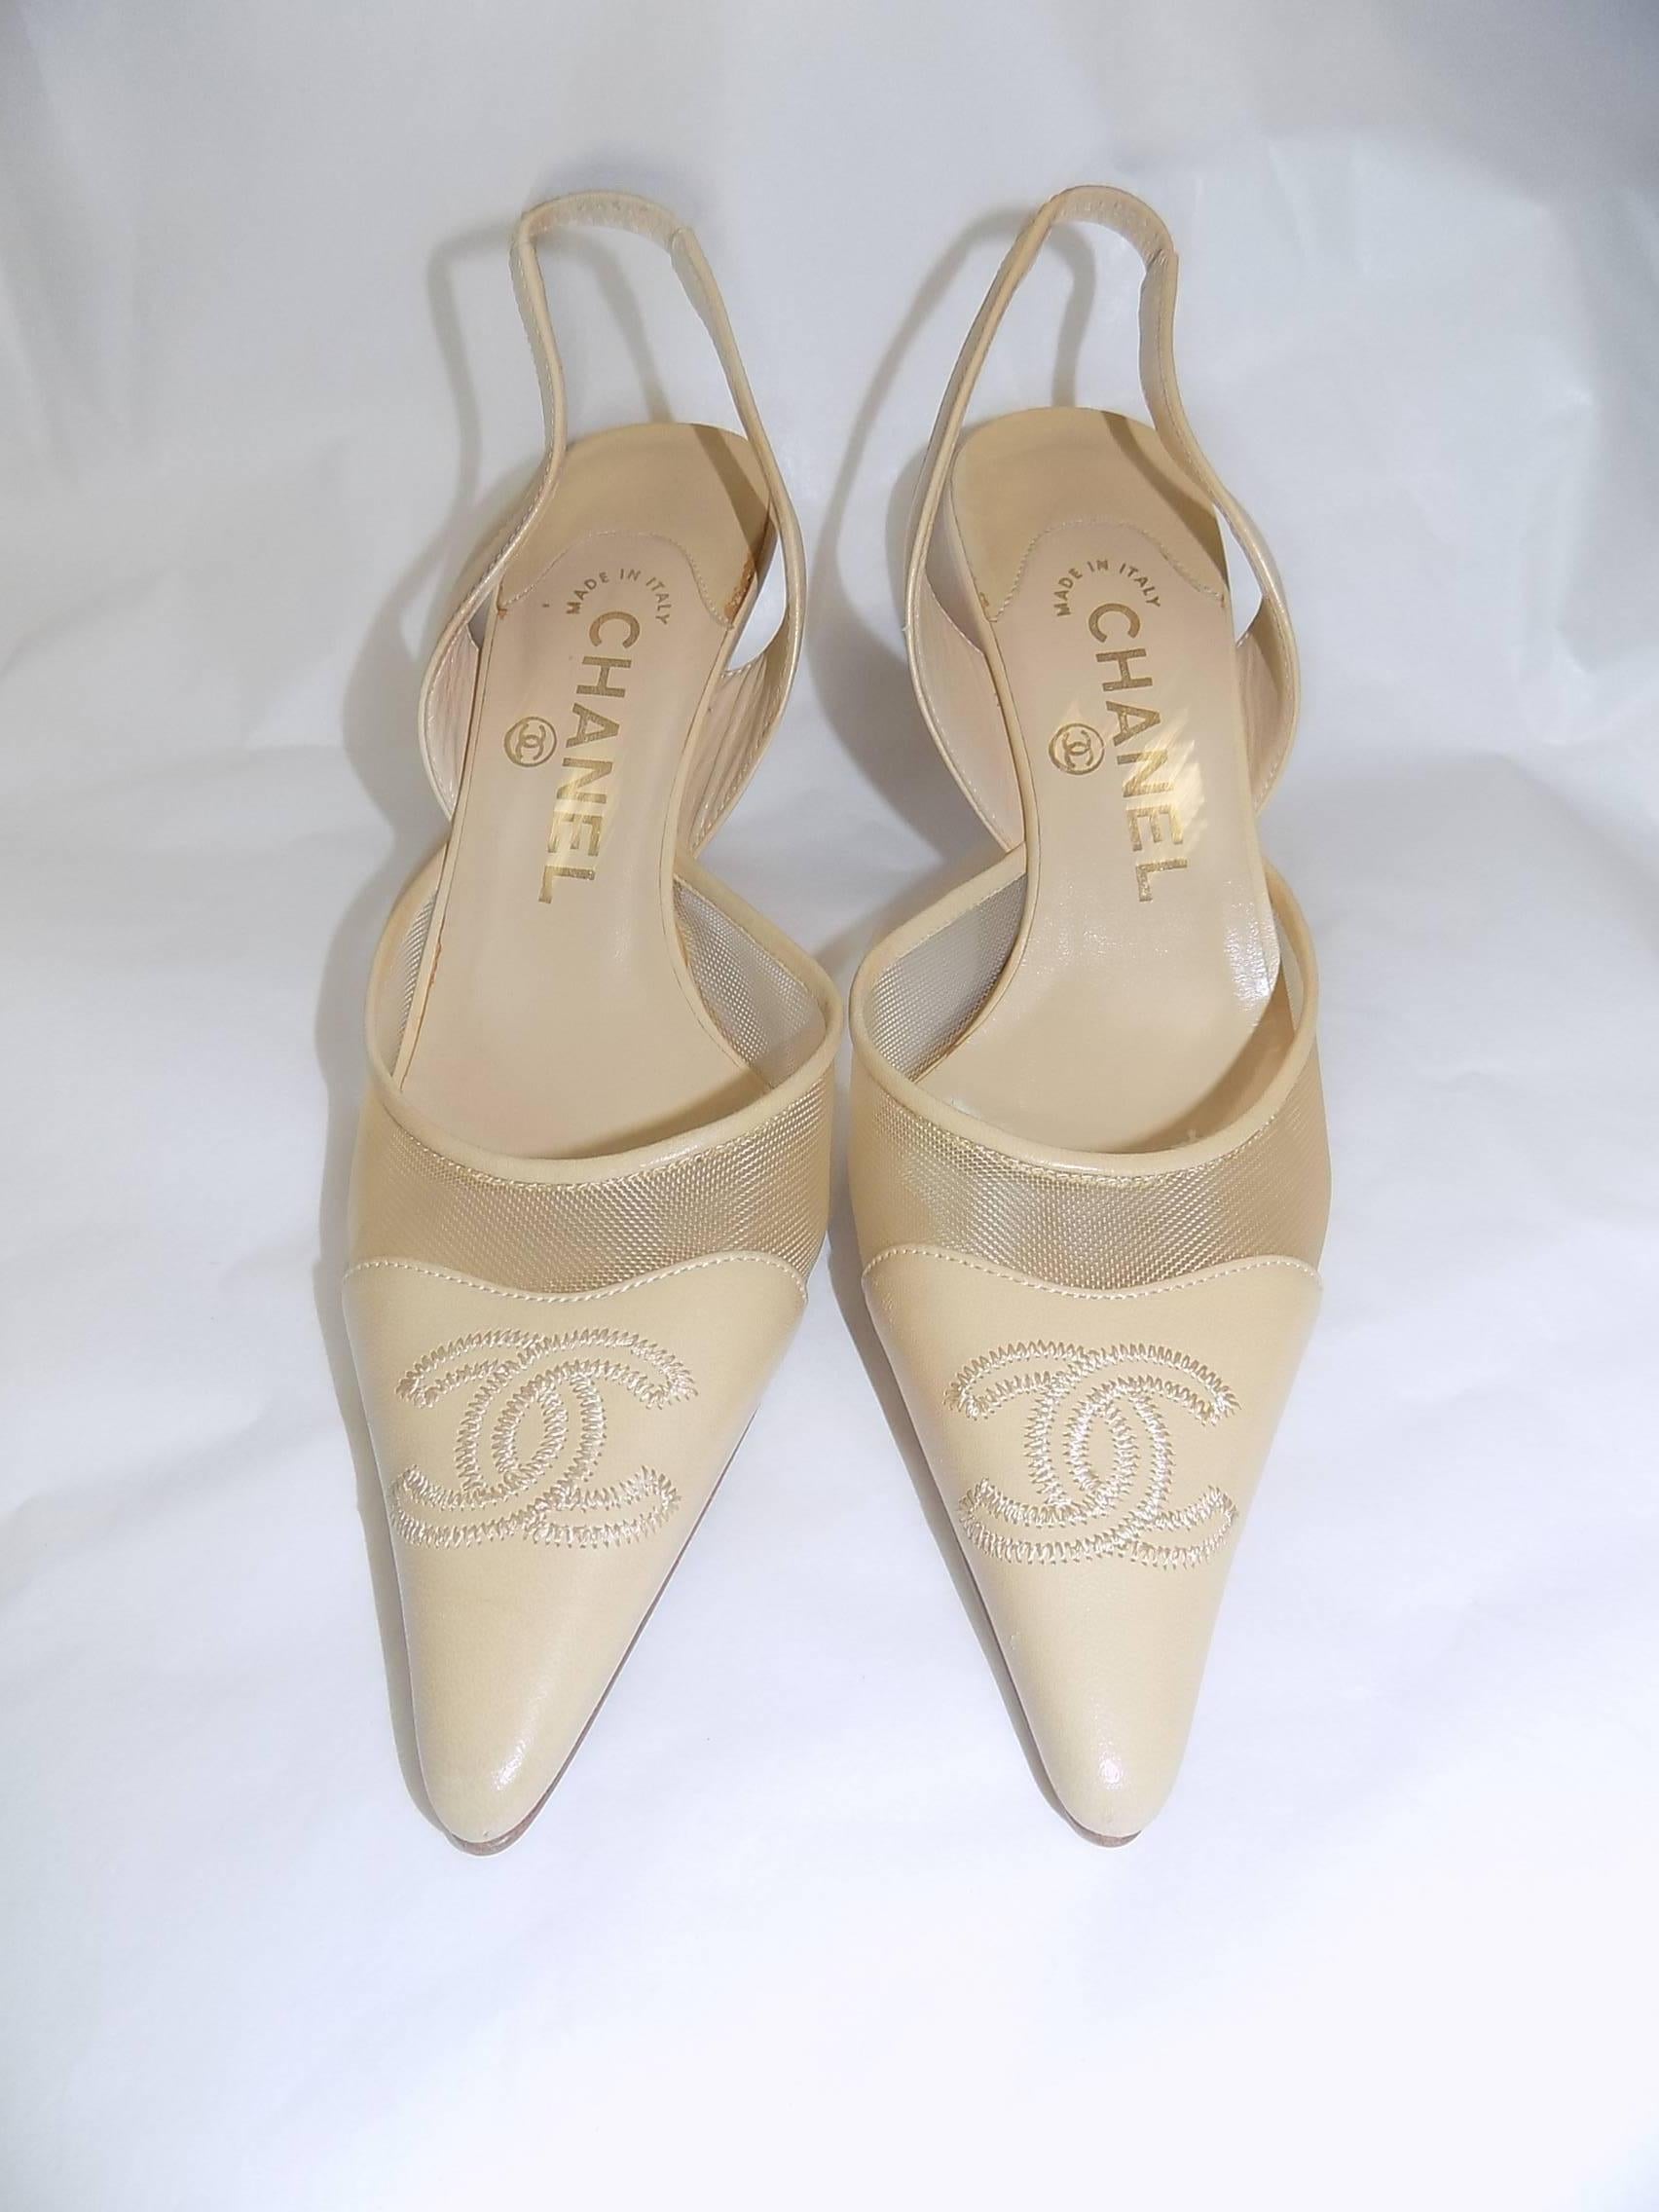 Perfect Chanel shoes. Gently worn but in mint condition. Slingback with mesh and embroidered CC logo at the point toe. # inch heel.